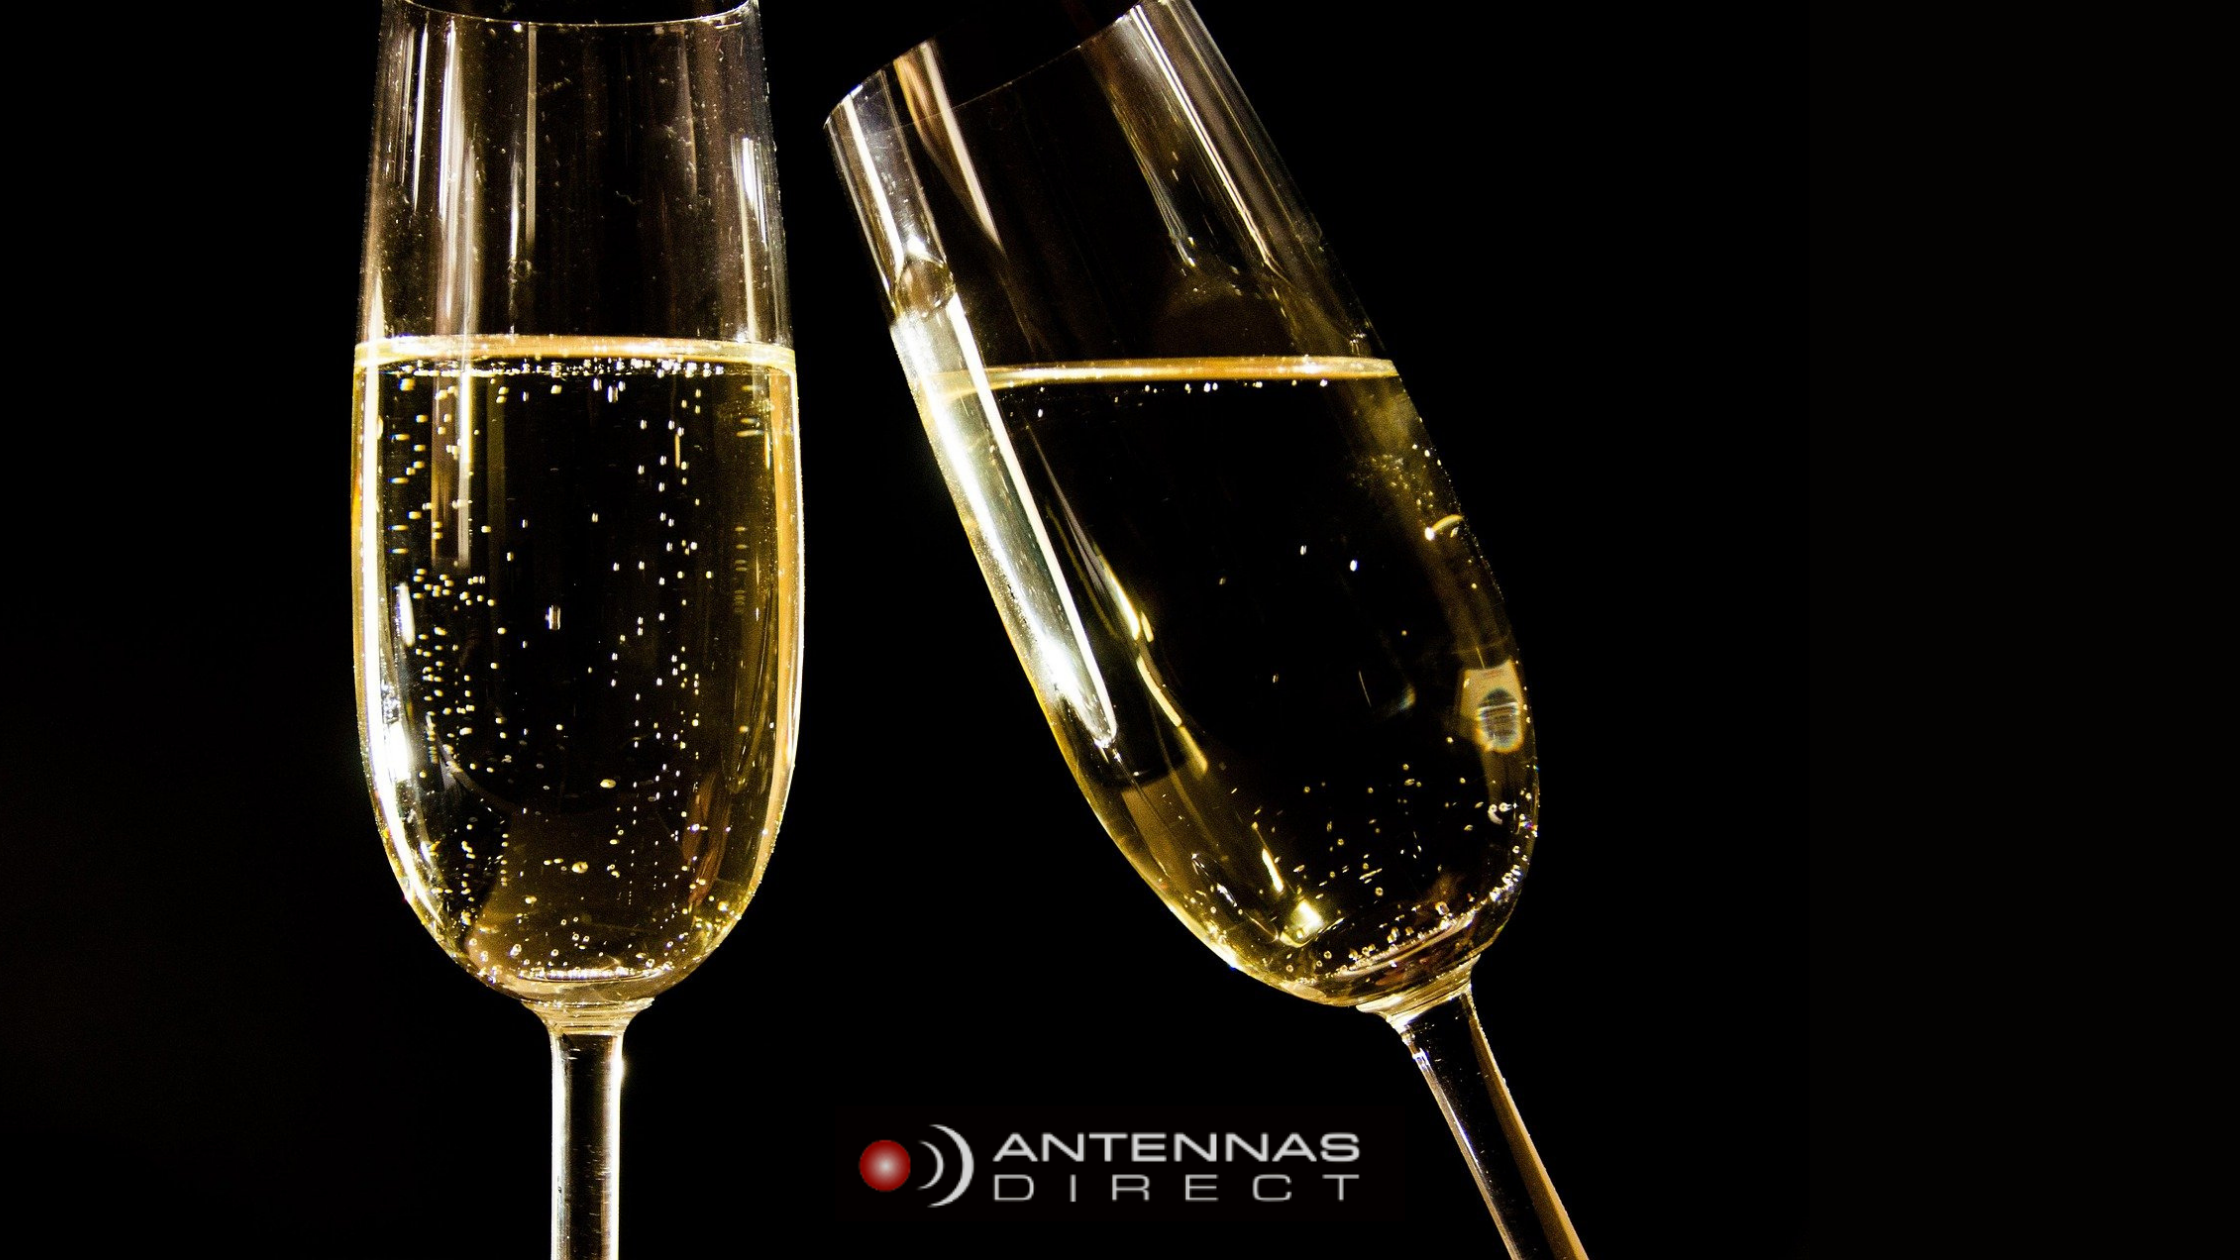 Antennas Direct New Year's Eve TV Specials, 2 champagne glasses